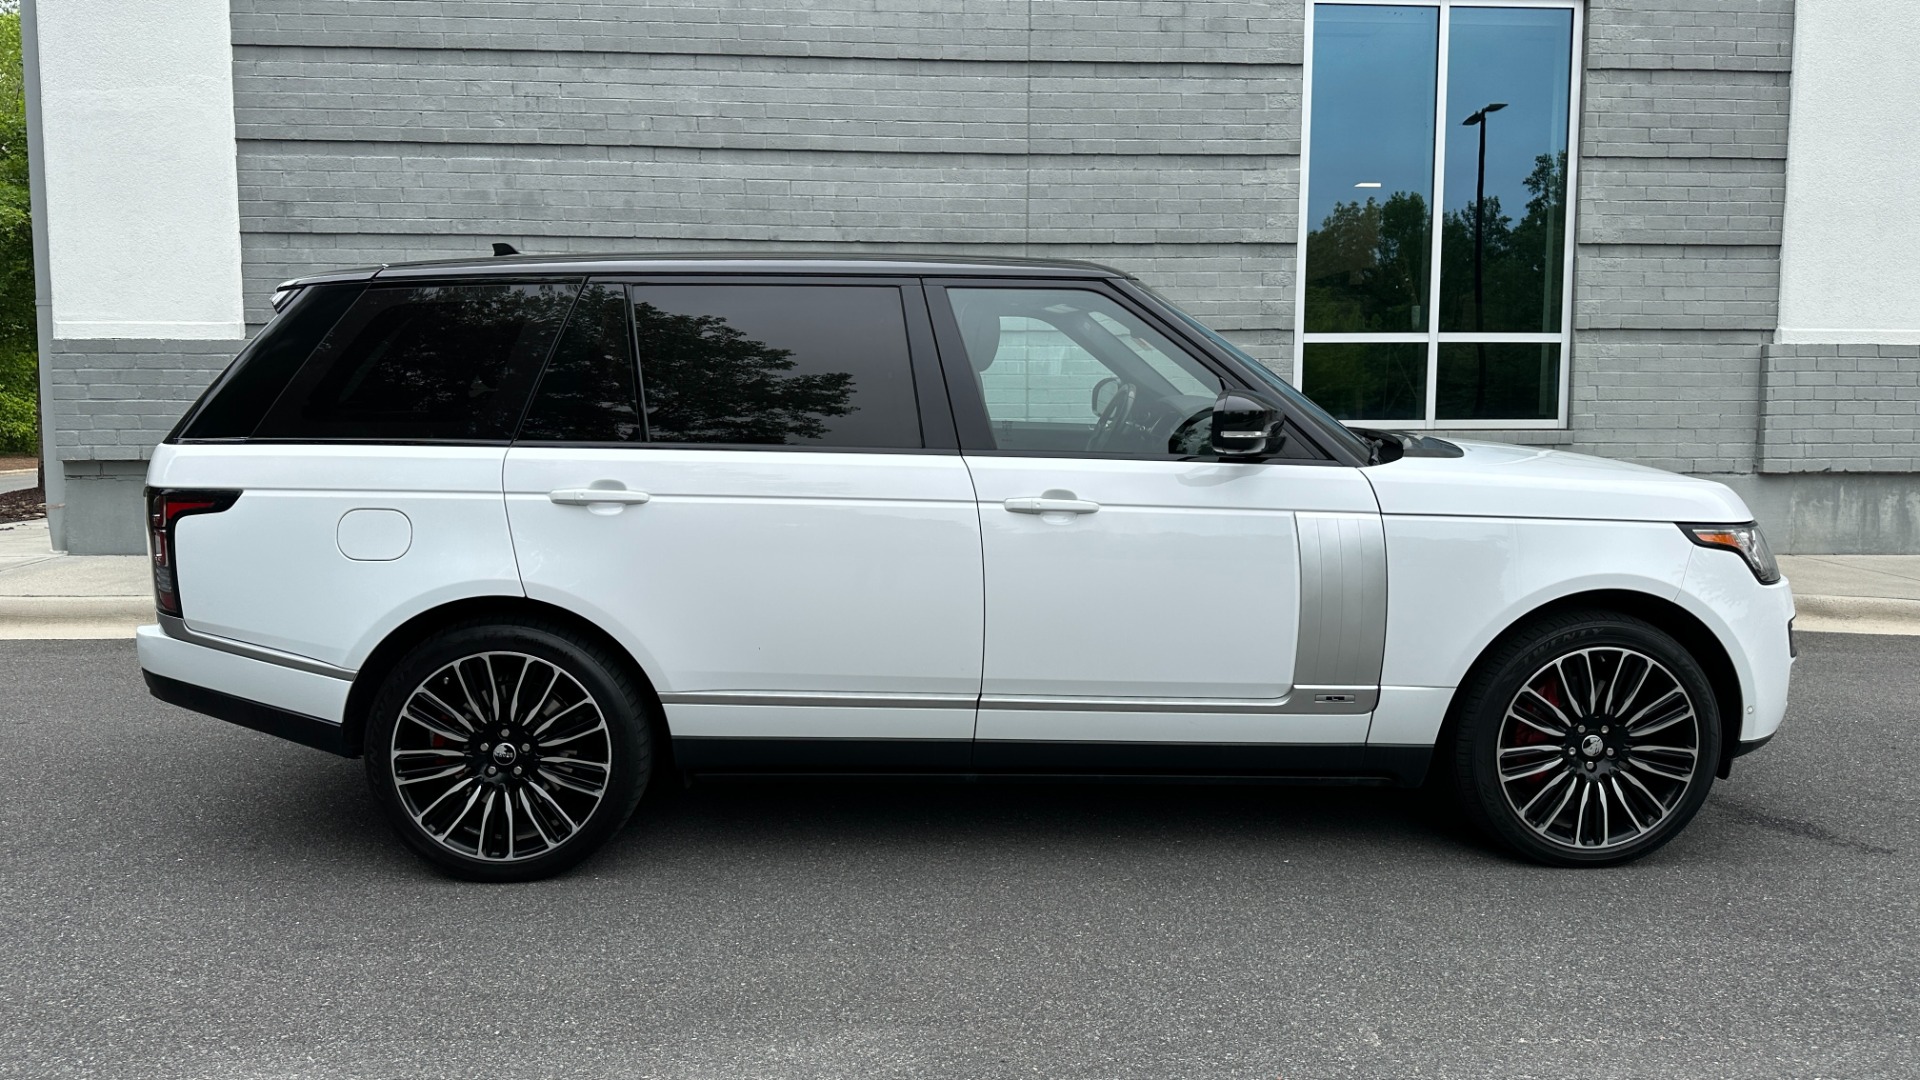 Used 2016 Land Rover Range Rover SUPERCHARGED 5.0 LWB / MERIDIAN / 22IN WHEELS / TOW PKG / CLIMATE PKG for sale $44,000 at Formula Imports in Charlotte NC 28227 6